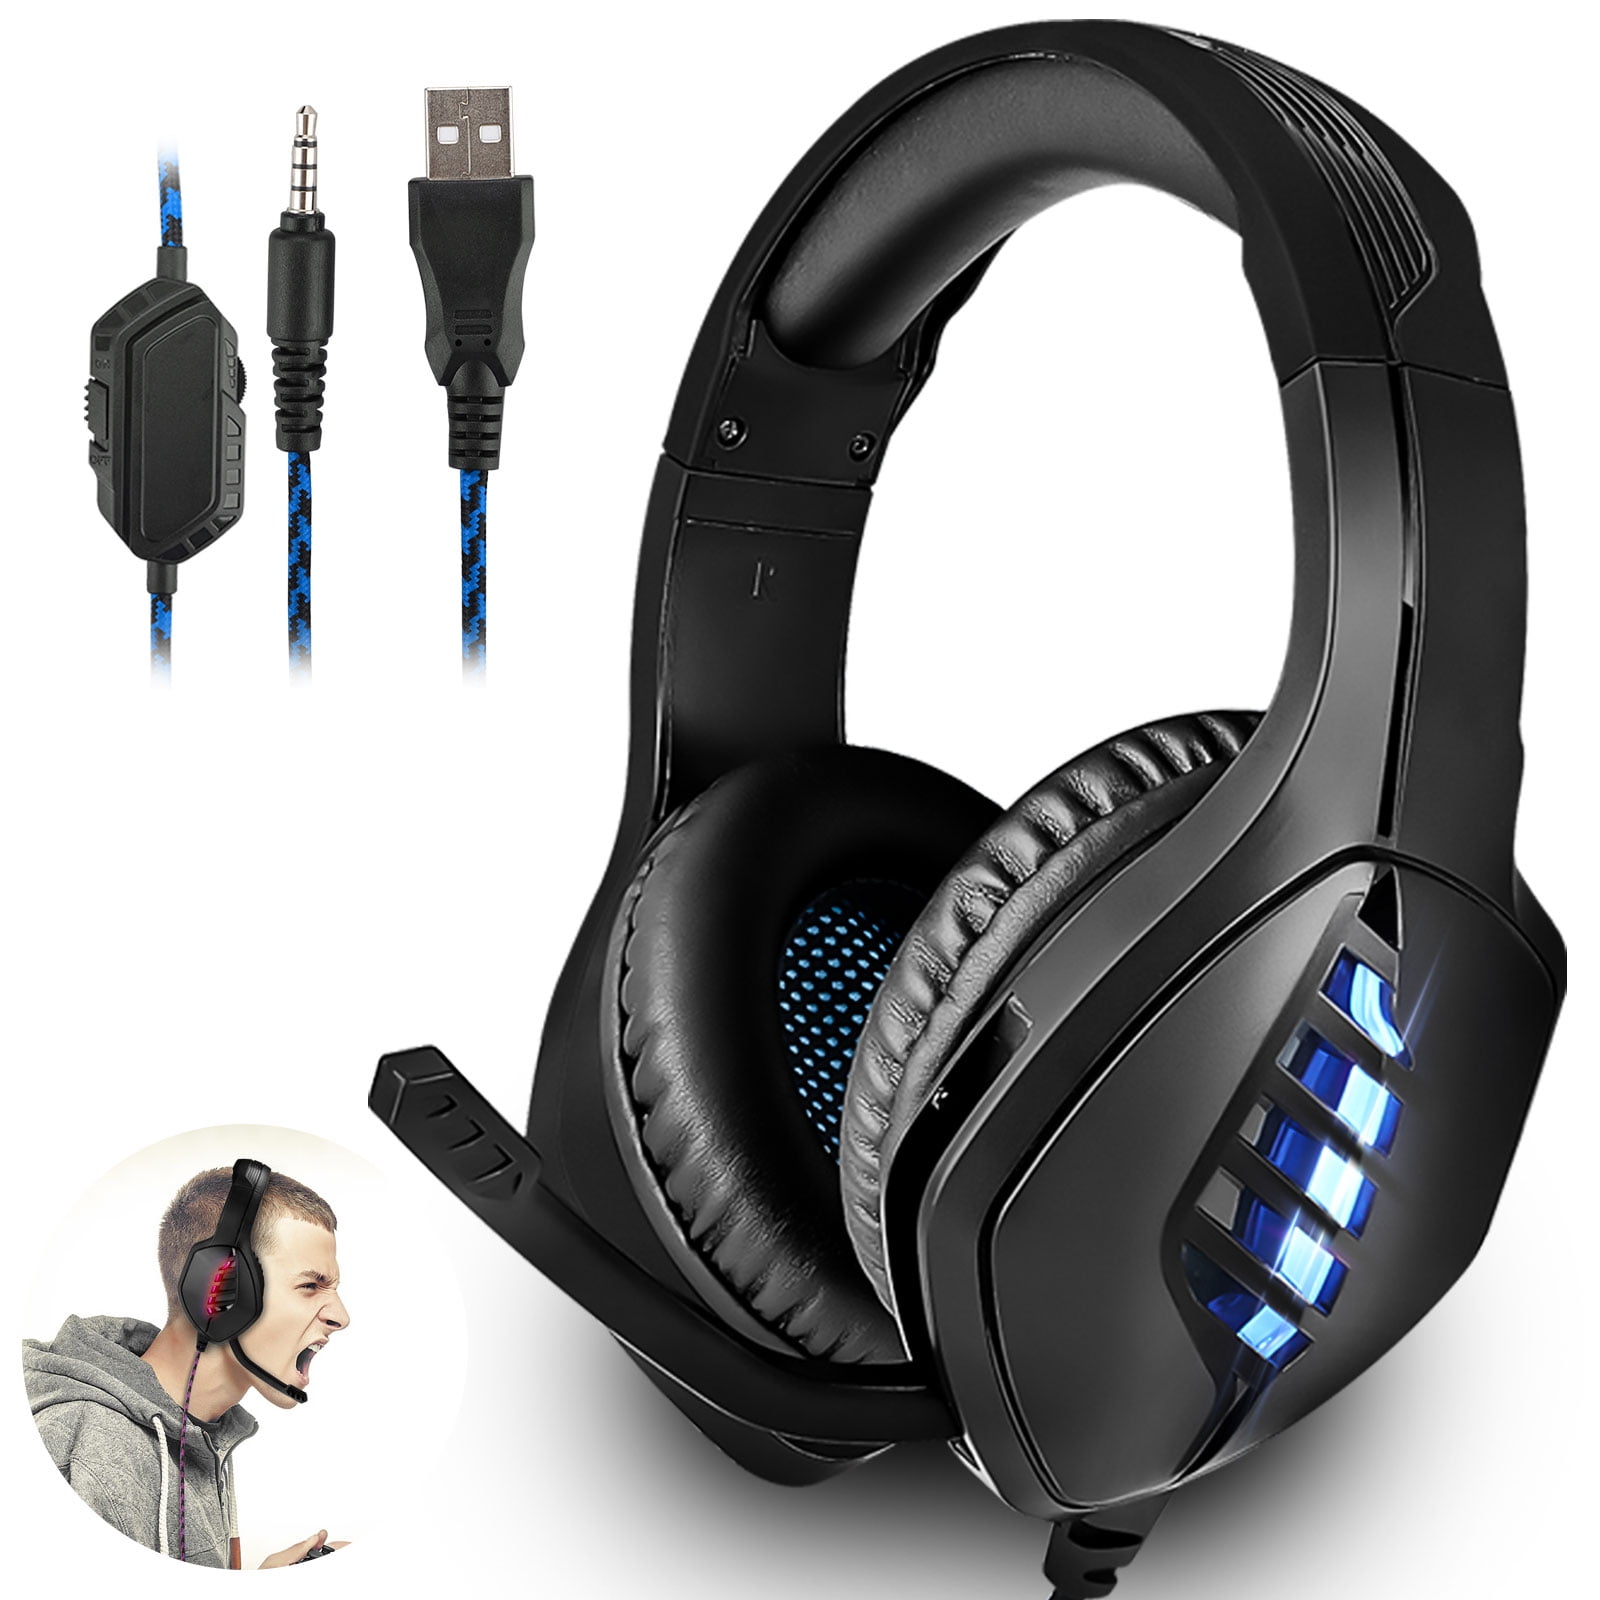 Gaming Headset with Mic Noice Cancelling Volume Control Soft Memory Earmuffs Over Ear Stereo Headphones for Xbox One,PC,PS4 